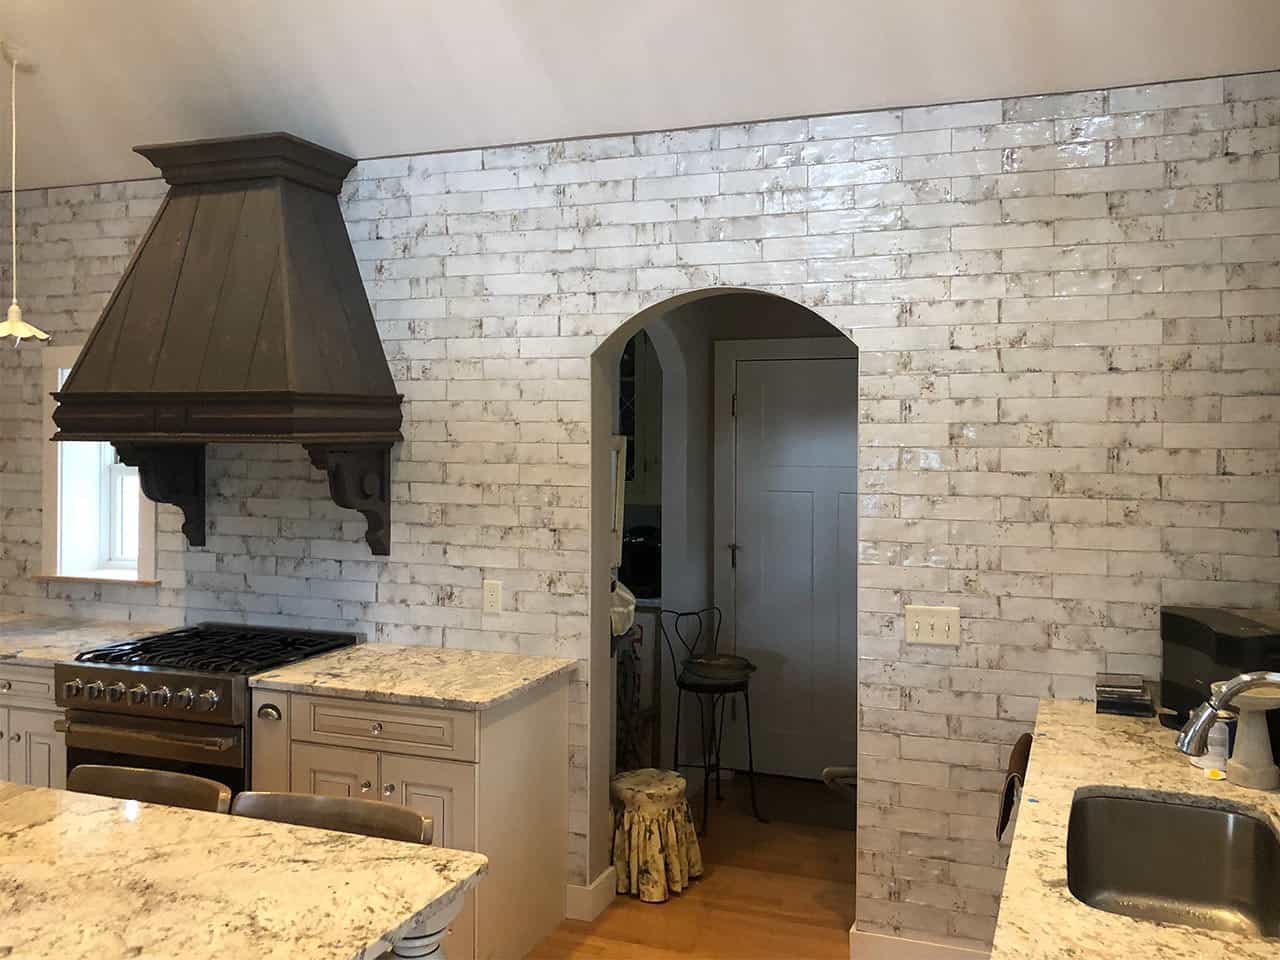 A kitchen with custom tile archway and wall